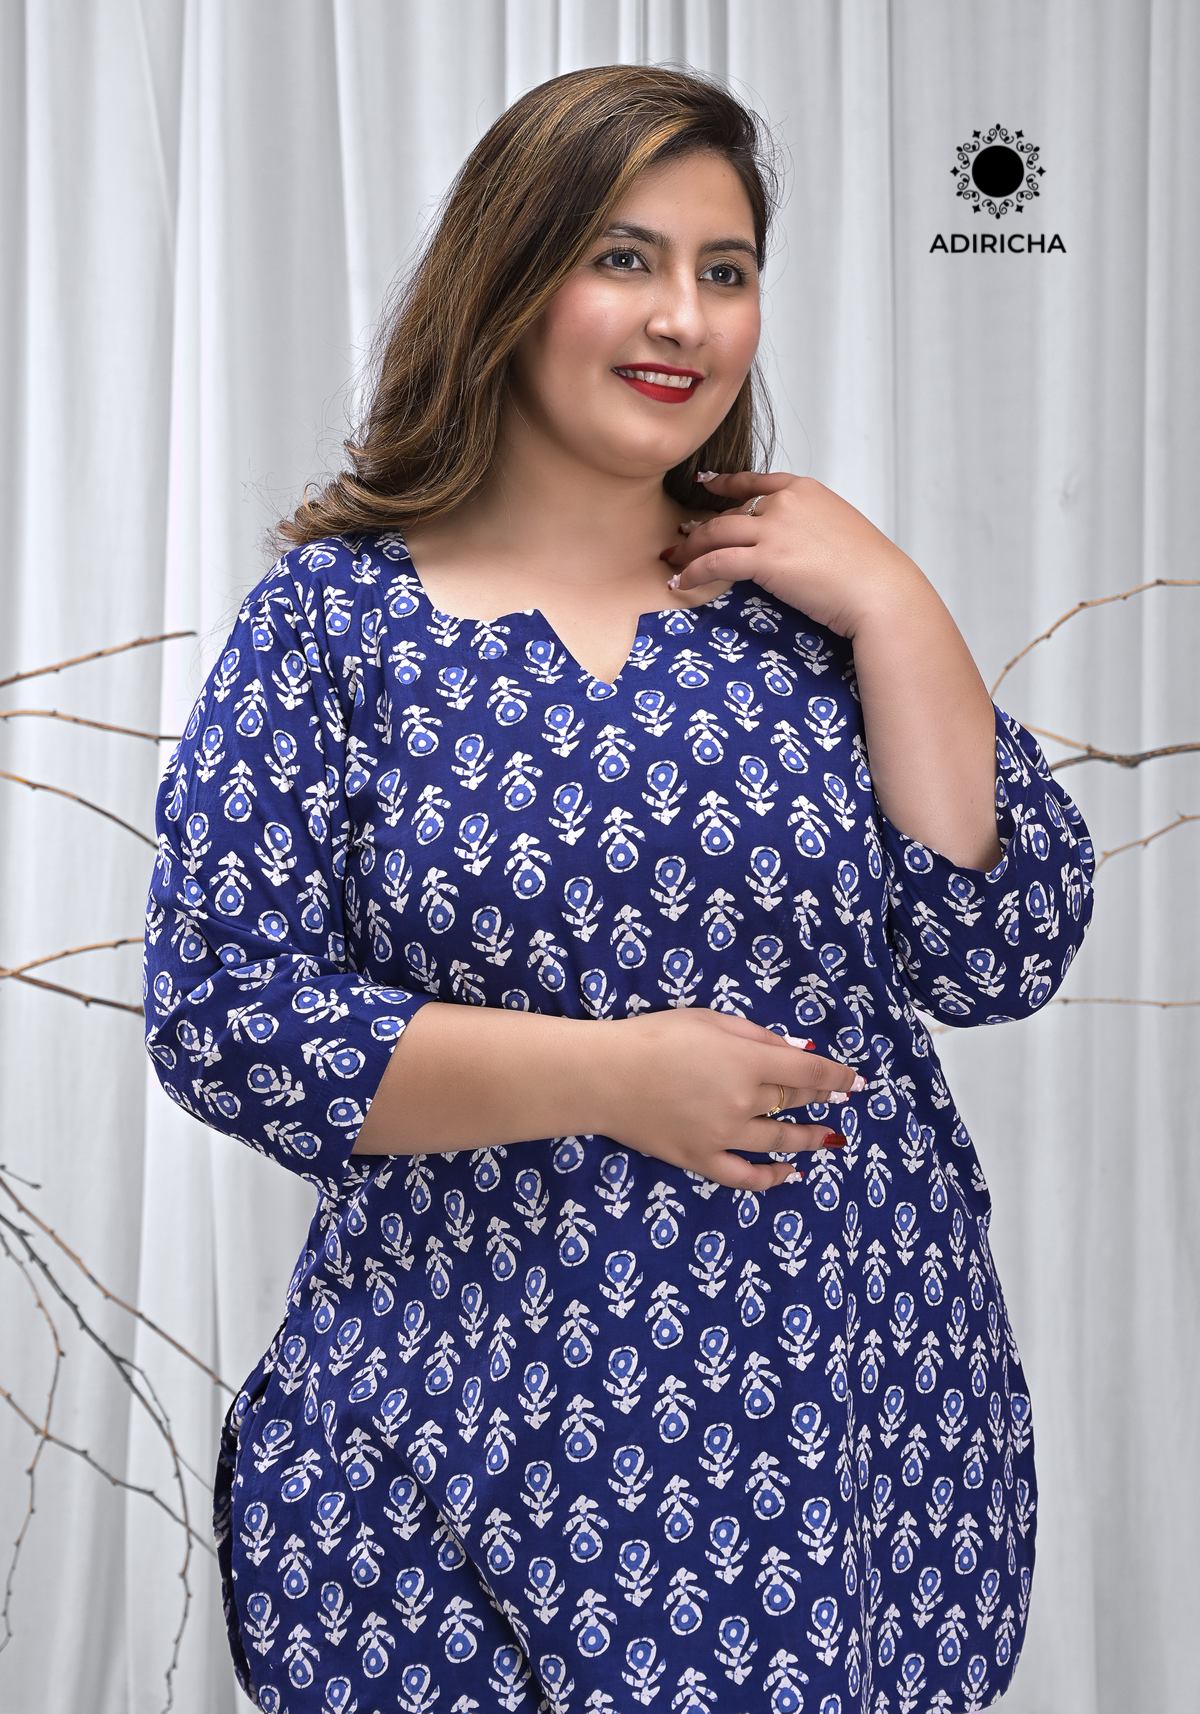 Dresses for Plus Size Women - 15 Stylish Designs for Comfortable Feel